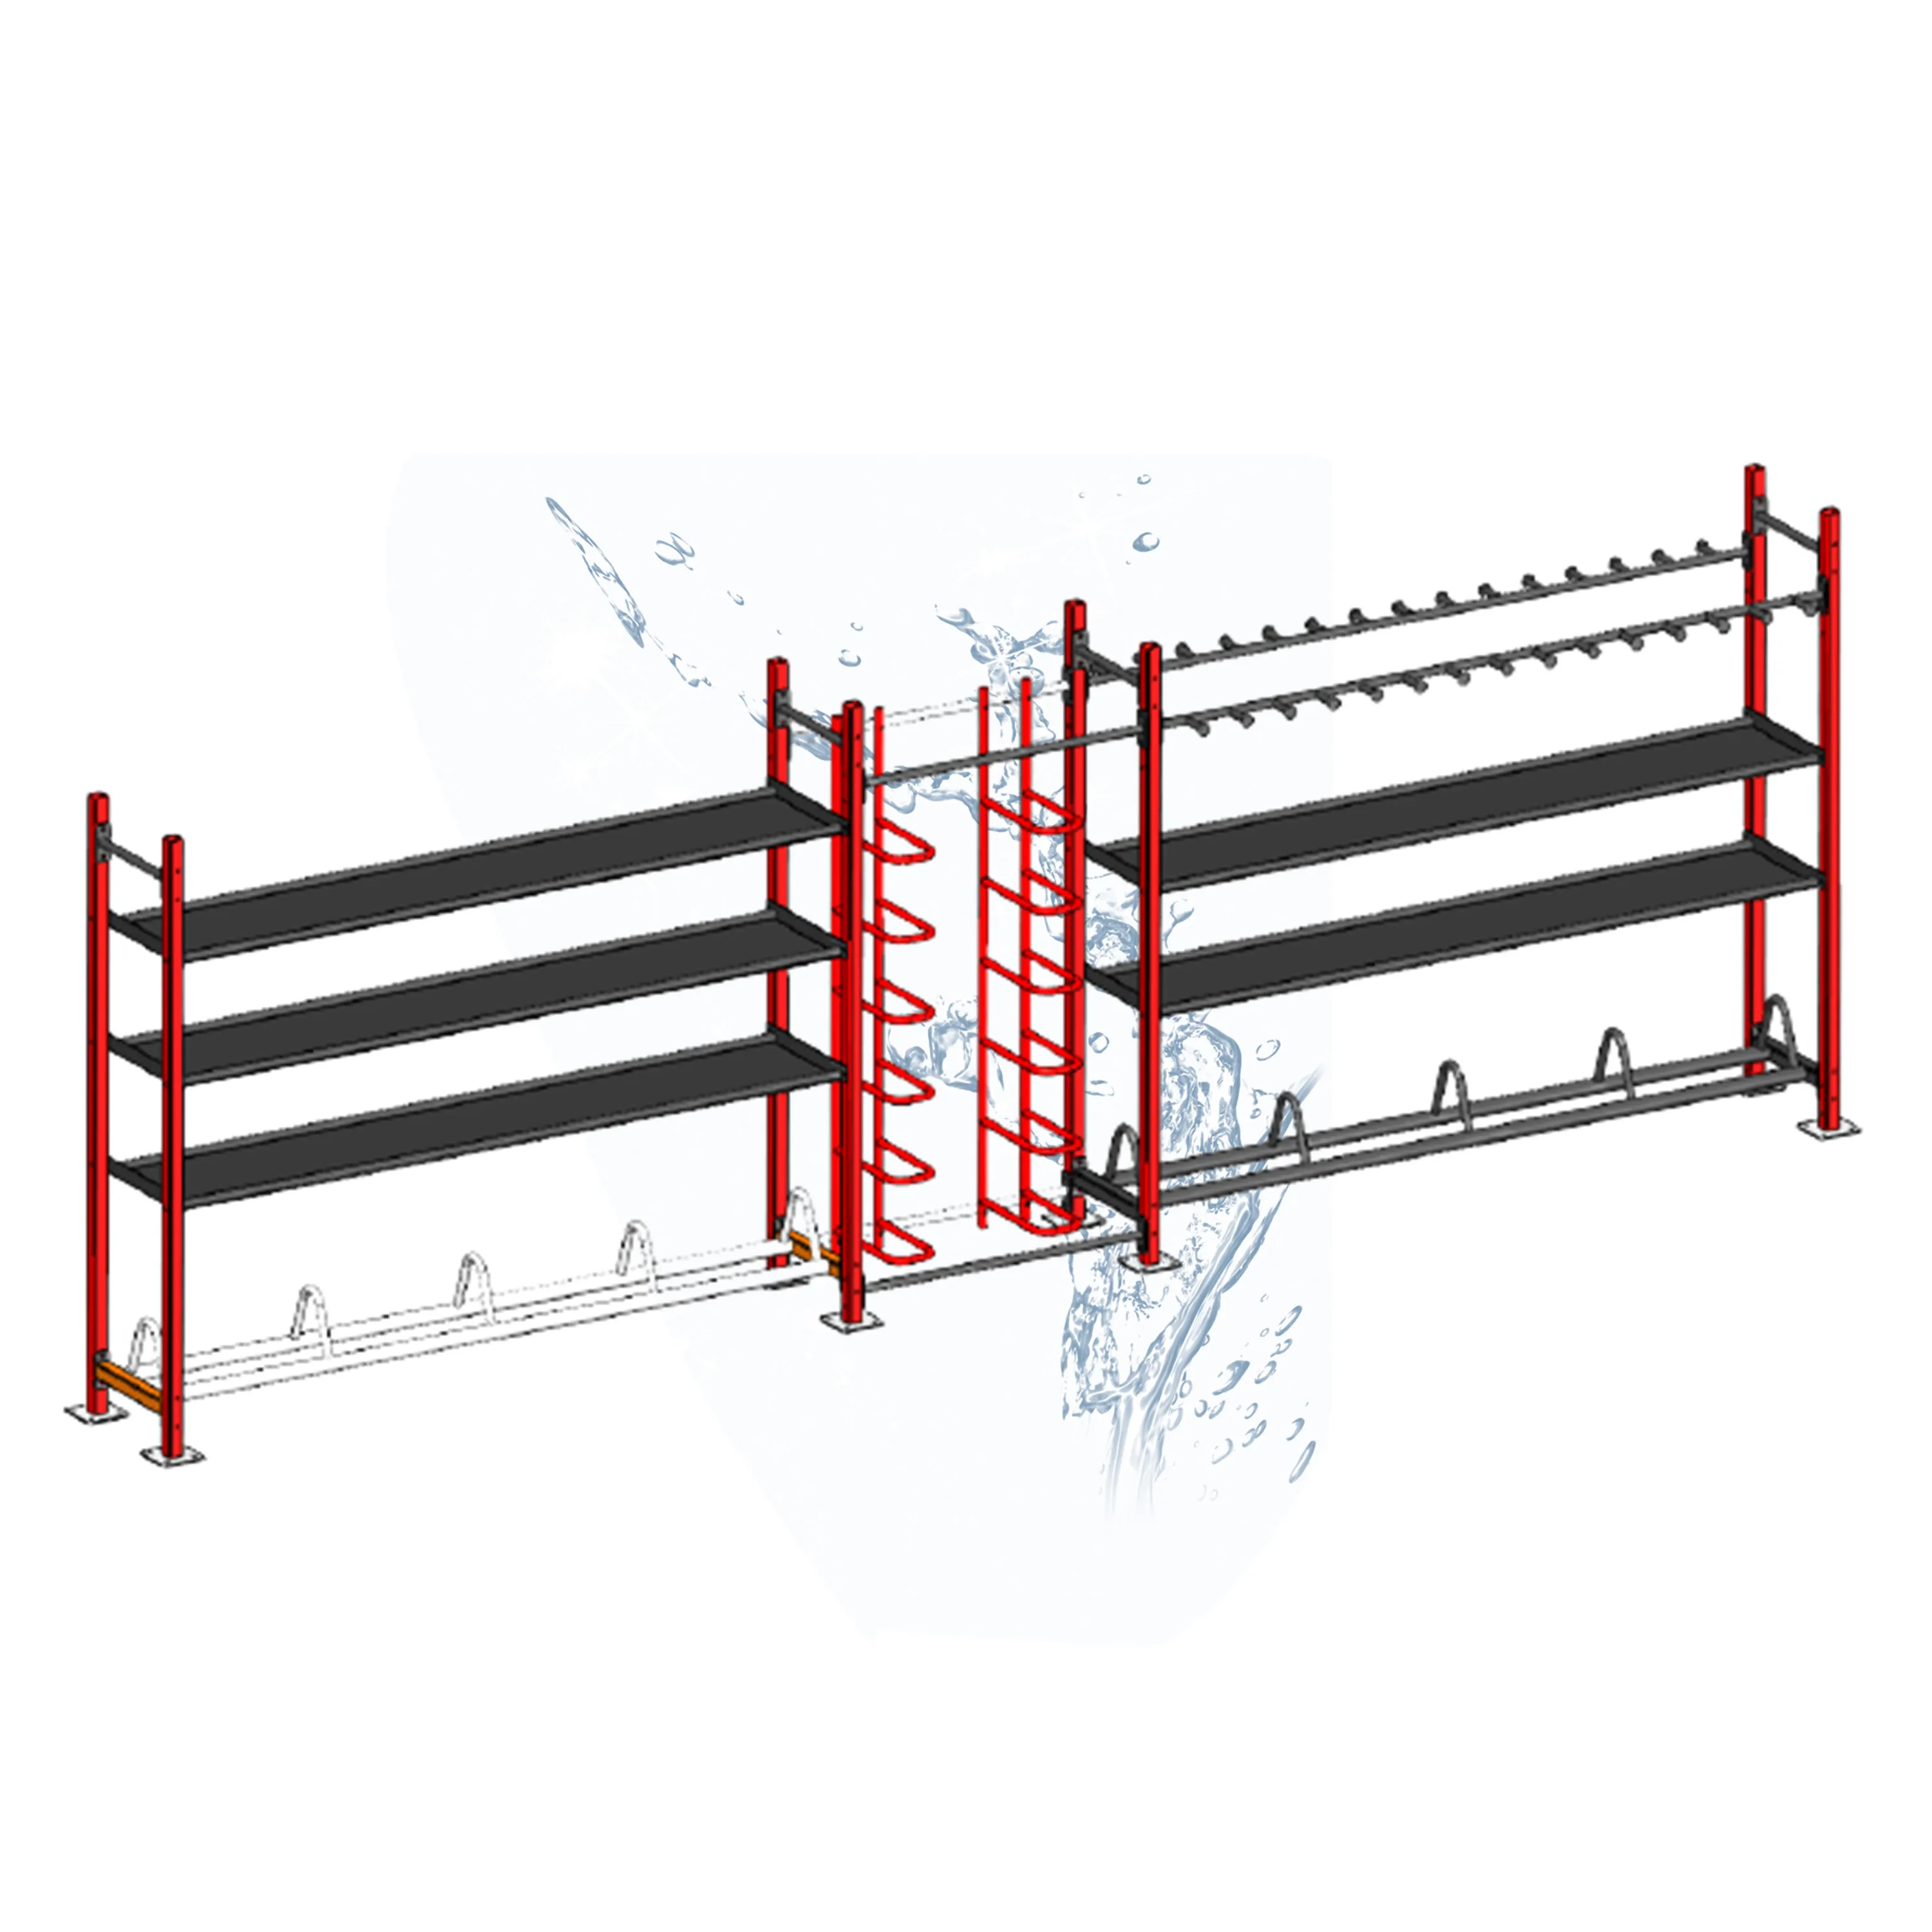 

New Fashion Big Commodity Shelf Sport Machine Rack Fitness Equipment Manufacturer with best quality and lower price, Customized color